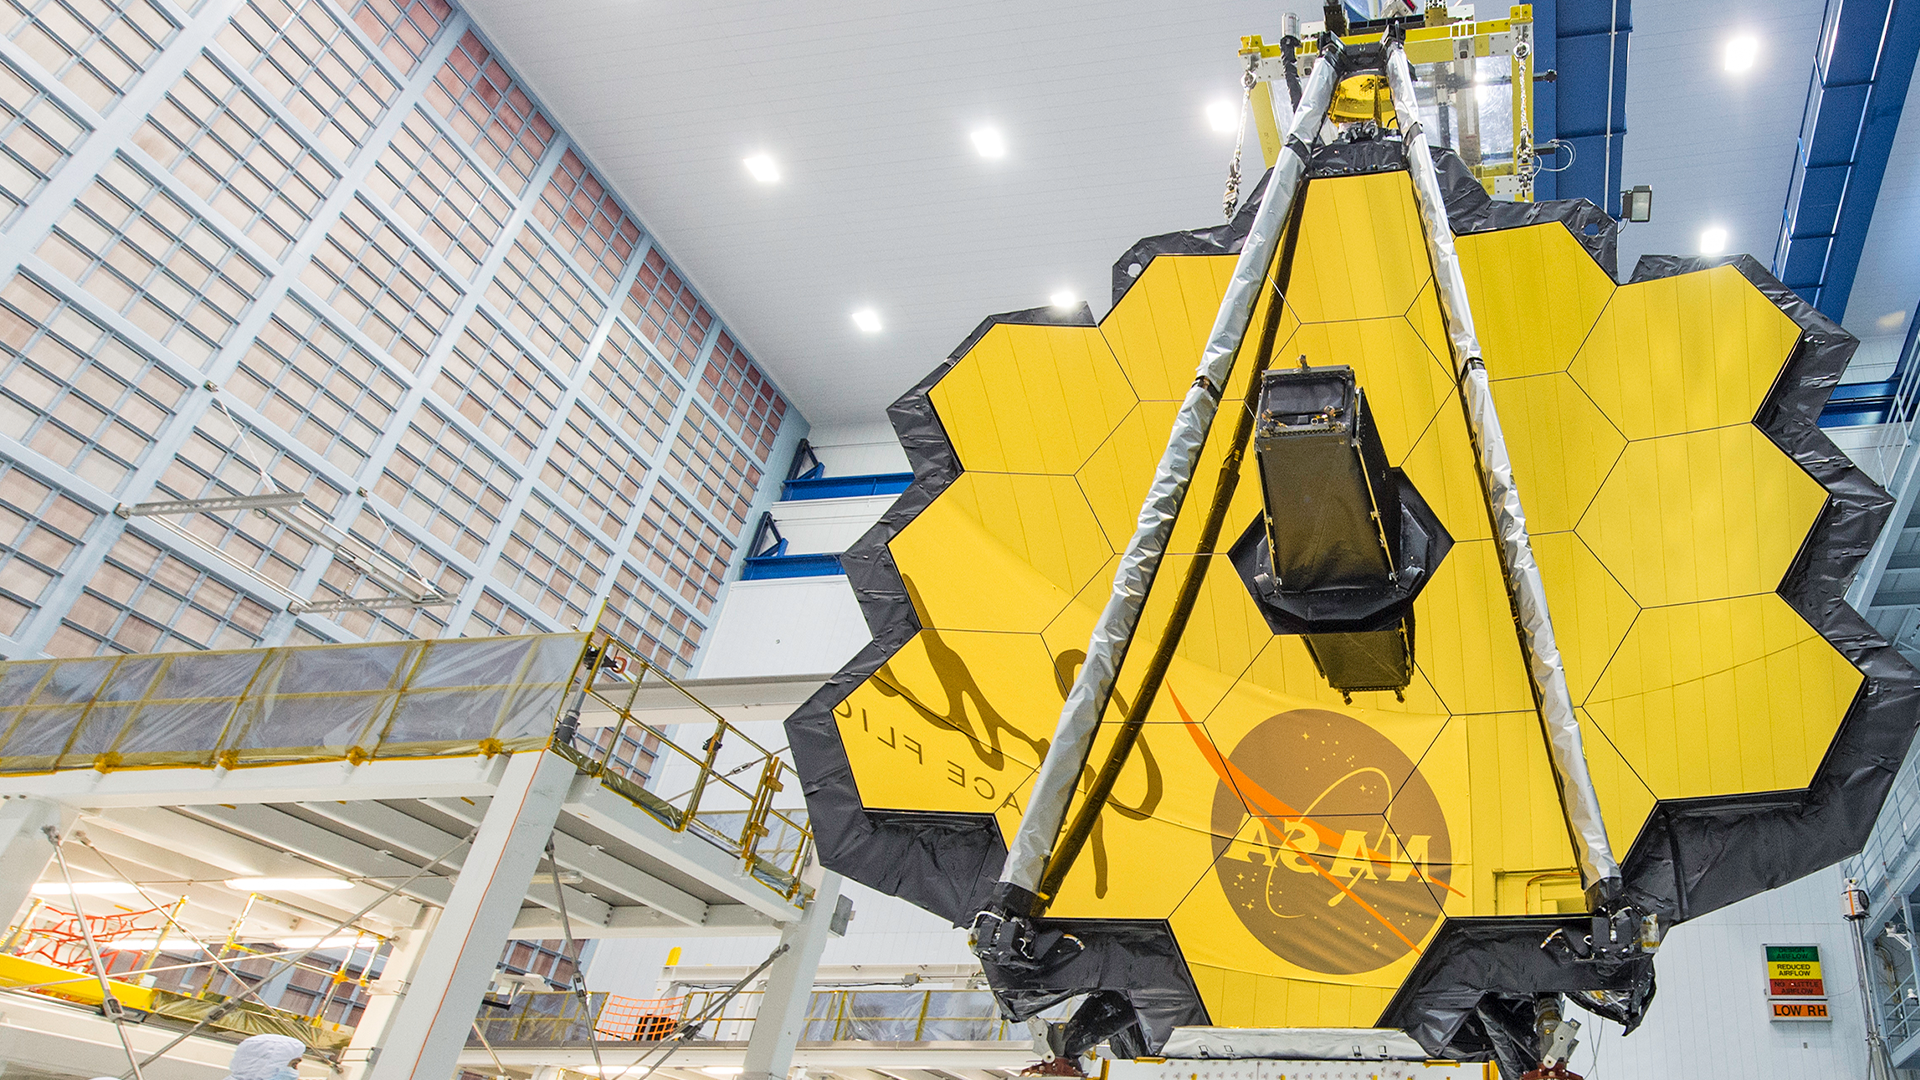 120 Jwst Stock Photos Pictures  RoyaltyFree Images  iStock